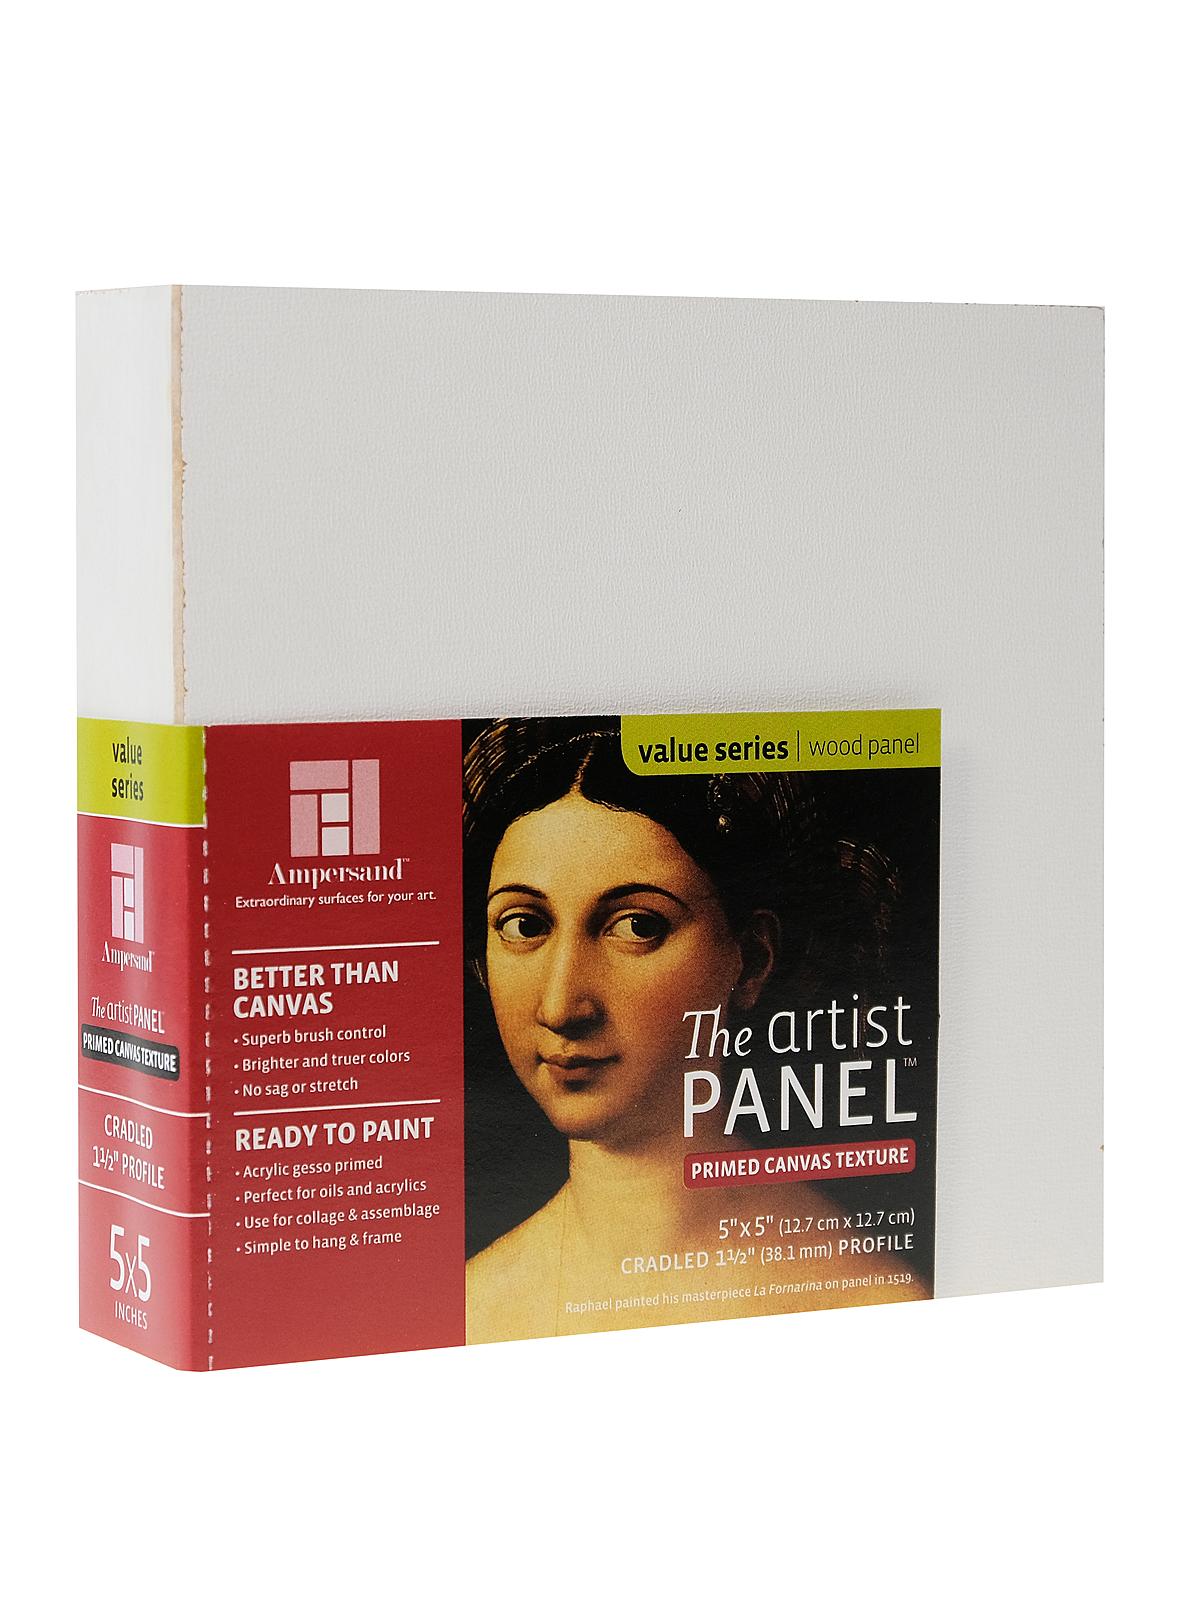 The Artist Panel Canvas Texture Cradled Profile 5 In. X 5 In. 1 1 2 In.